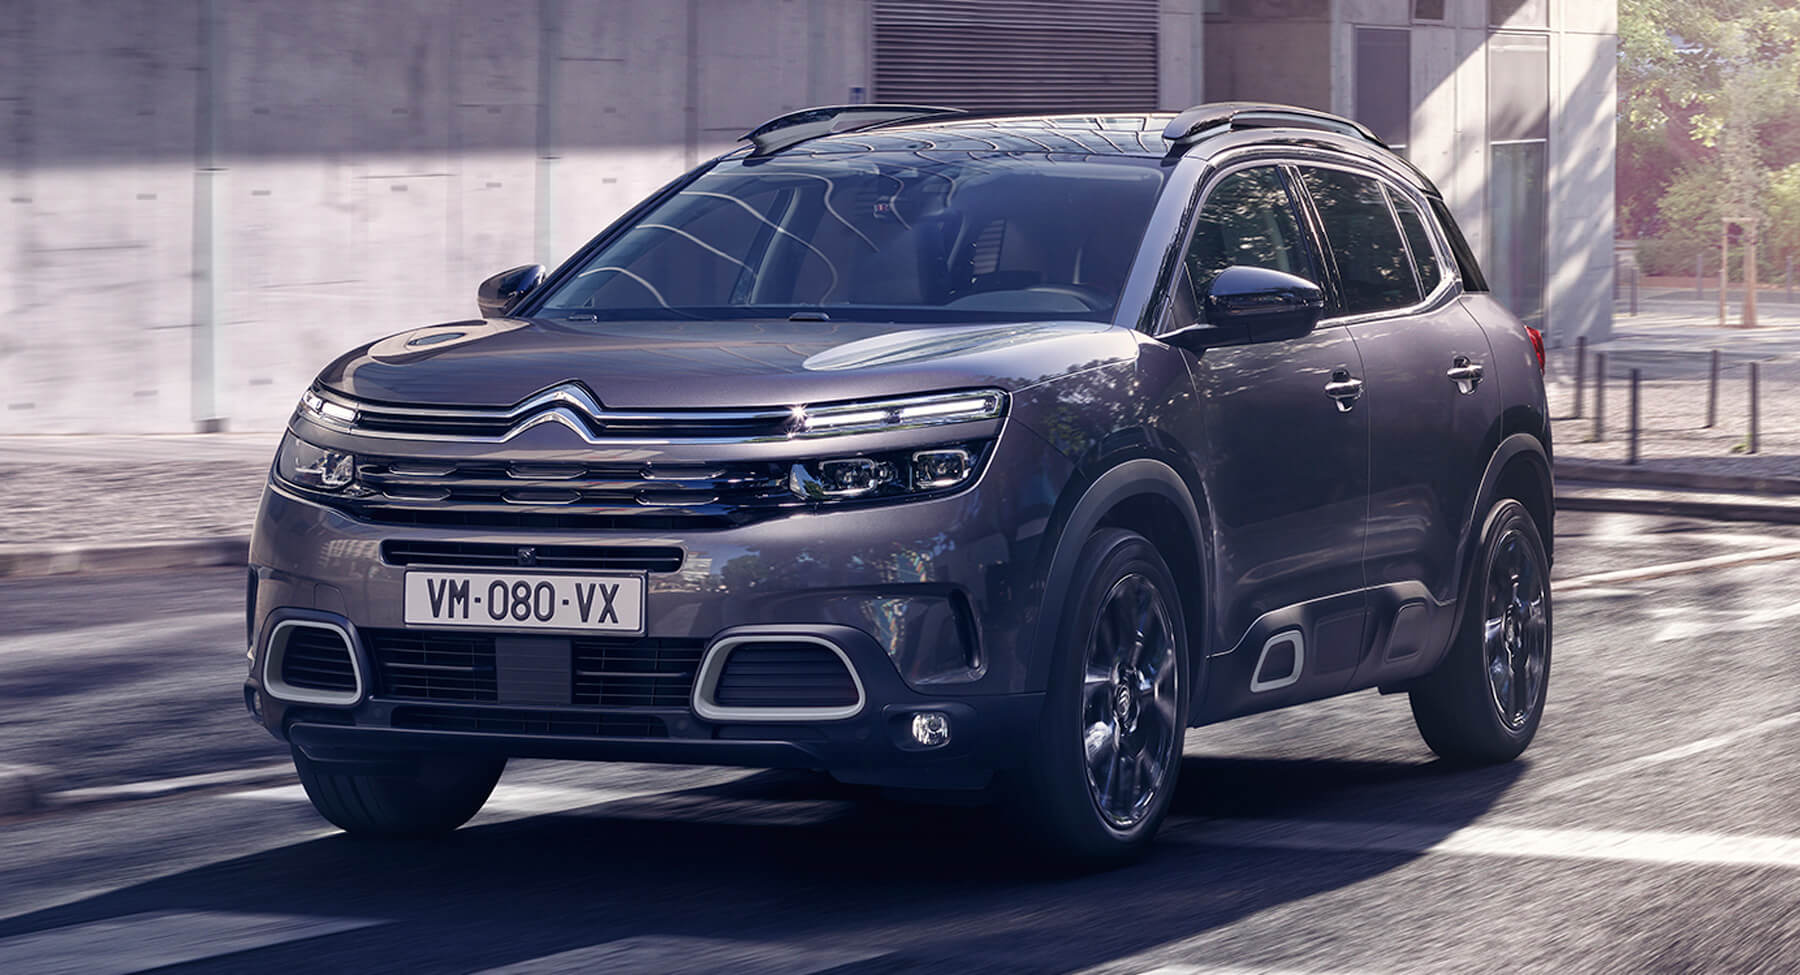 Citroen Means Business With Germany's New C5 Aircross Models